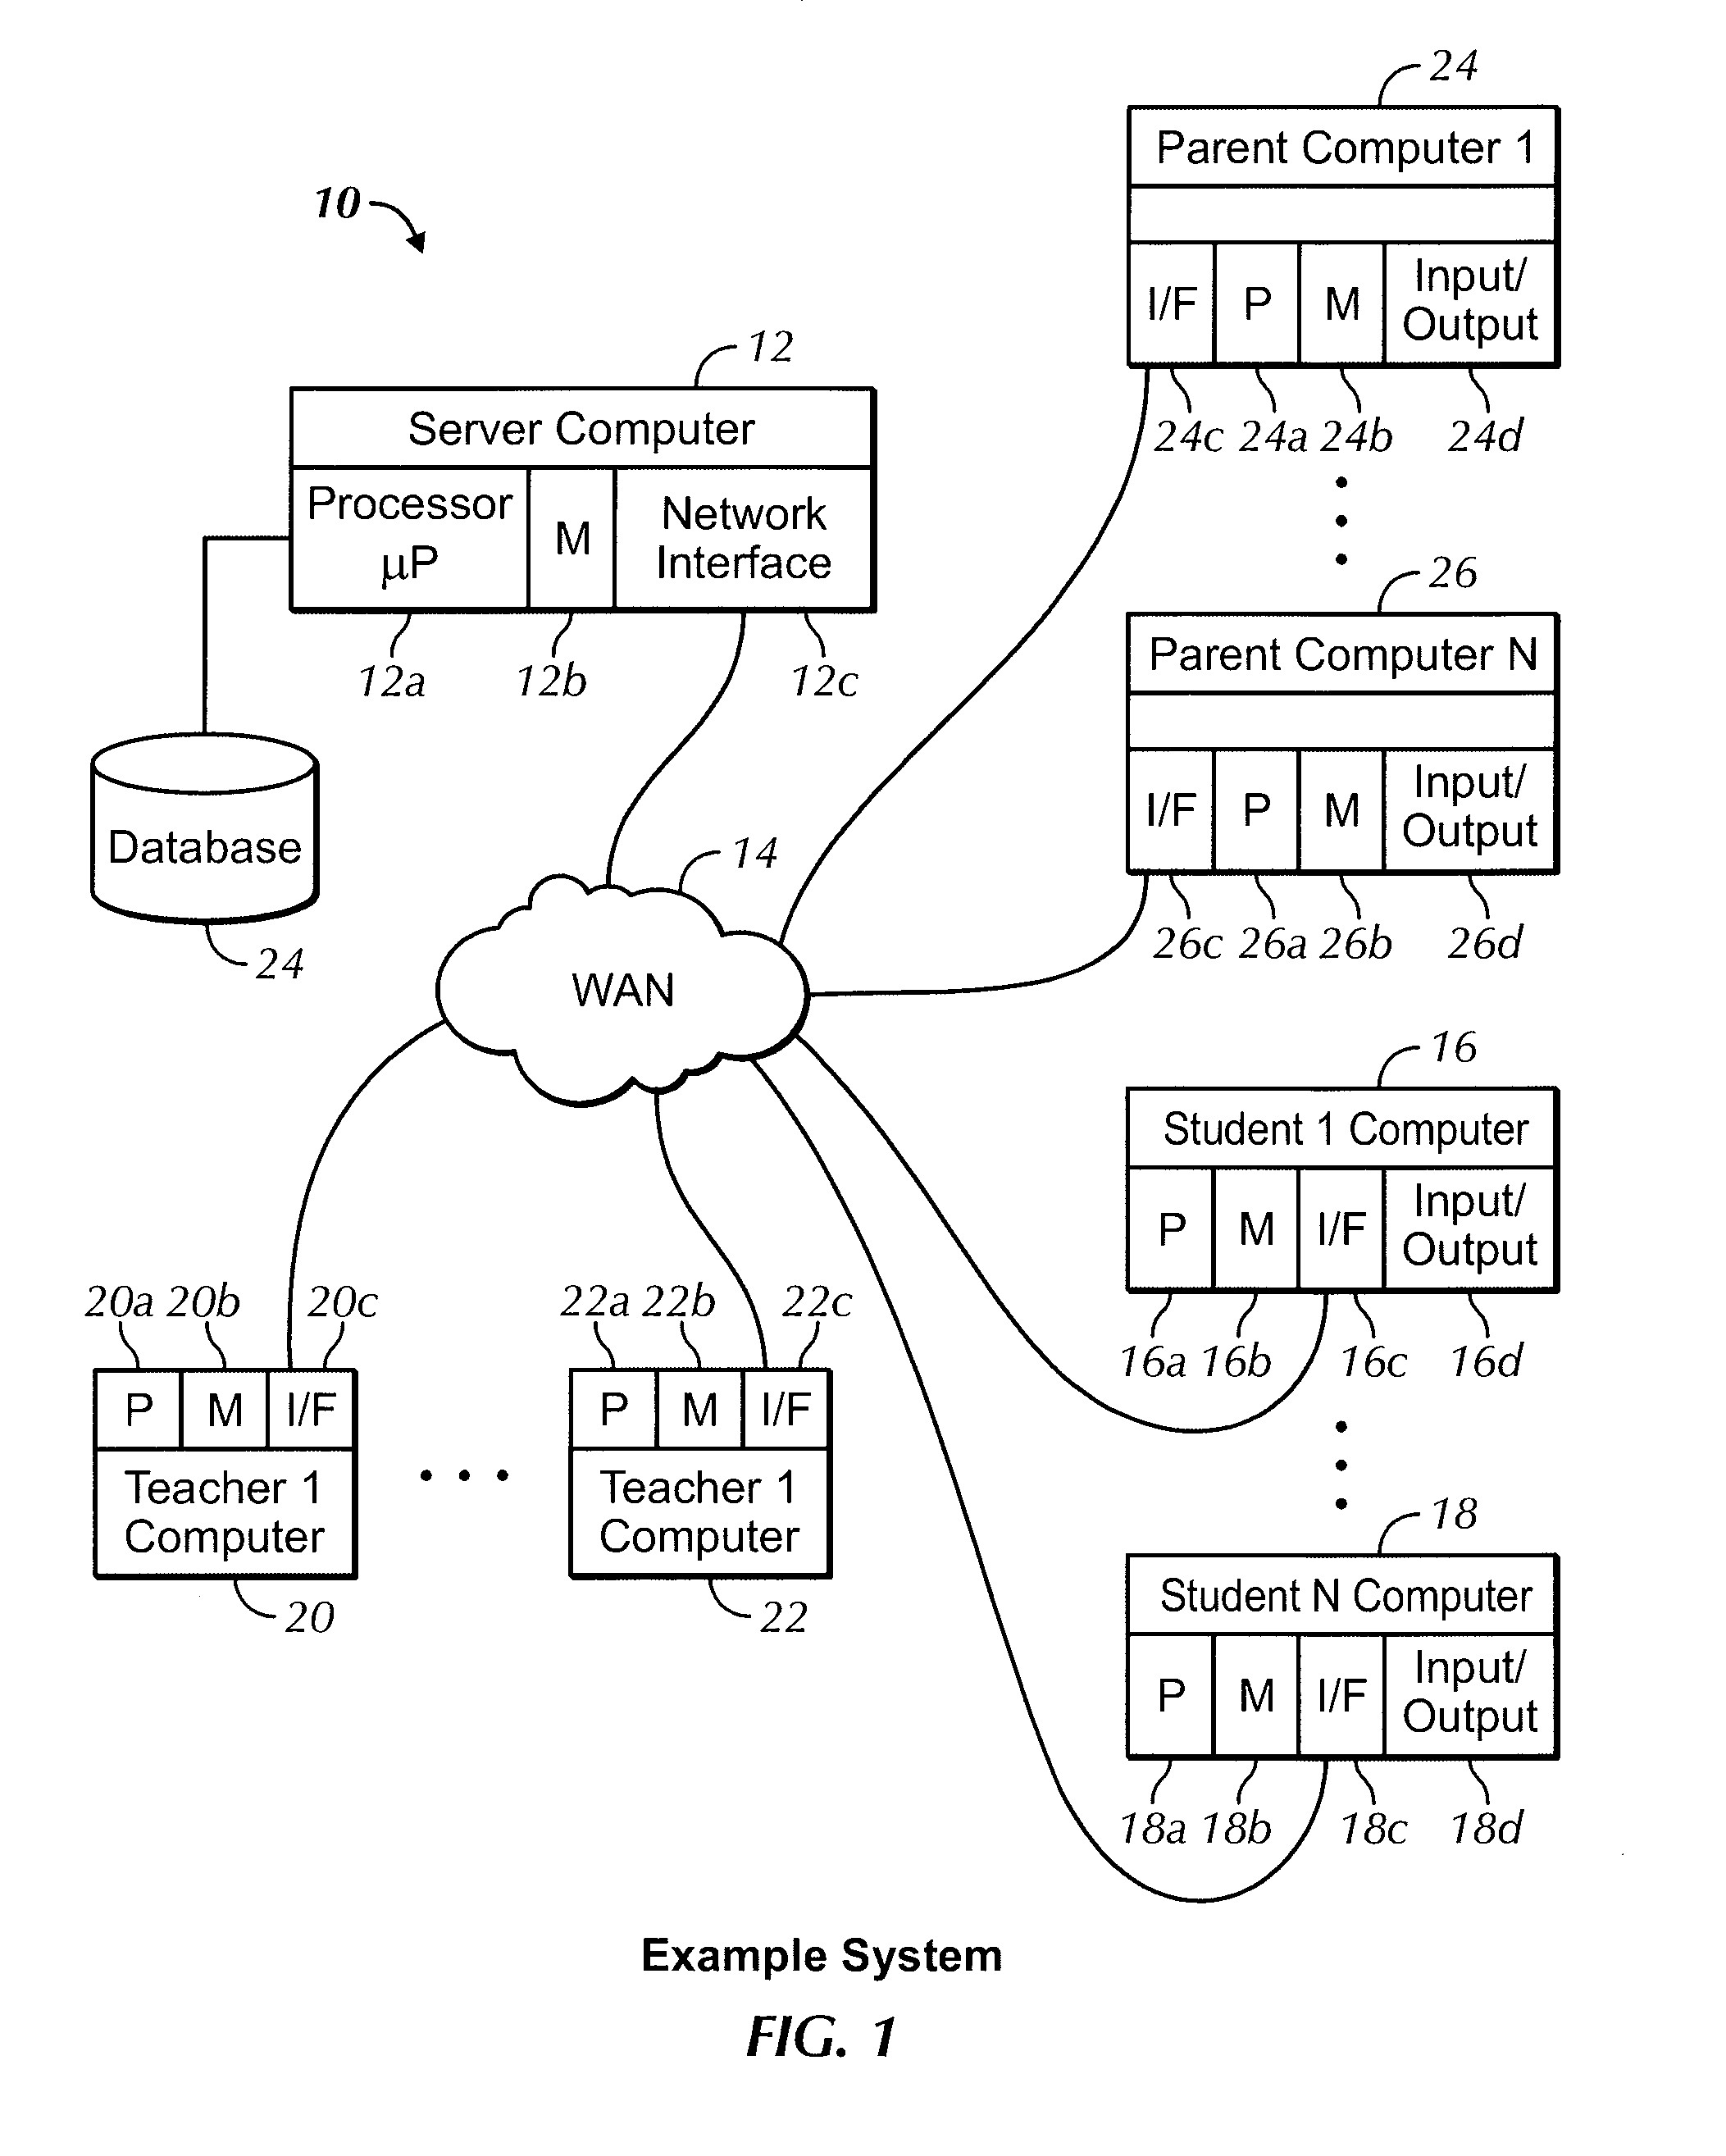 Method and apparatus for a secure, collaborative computer based community